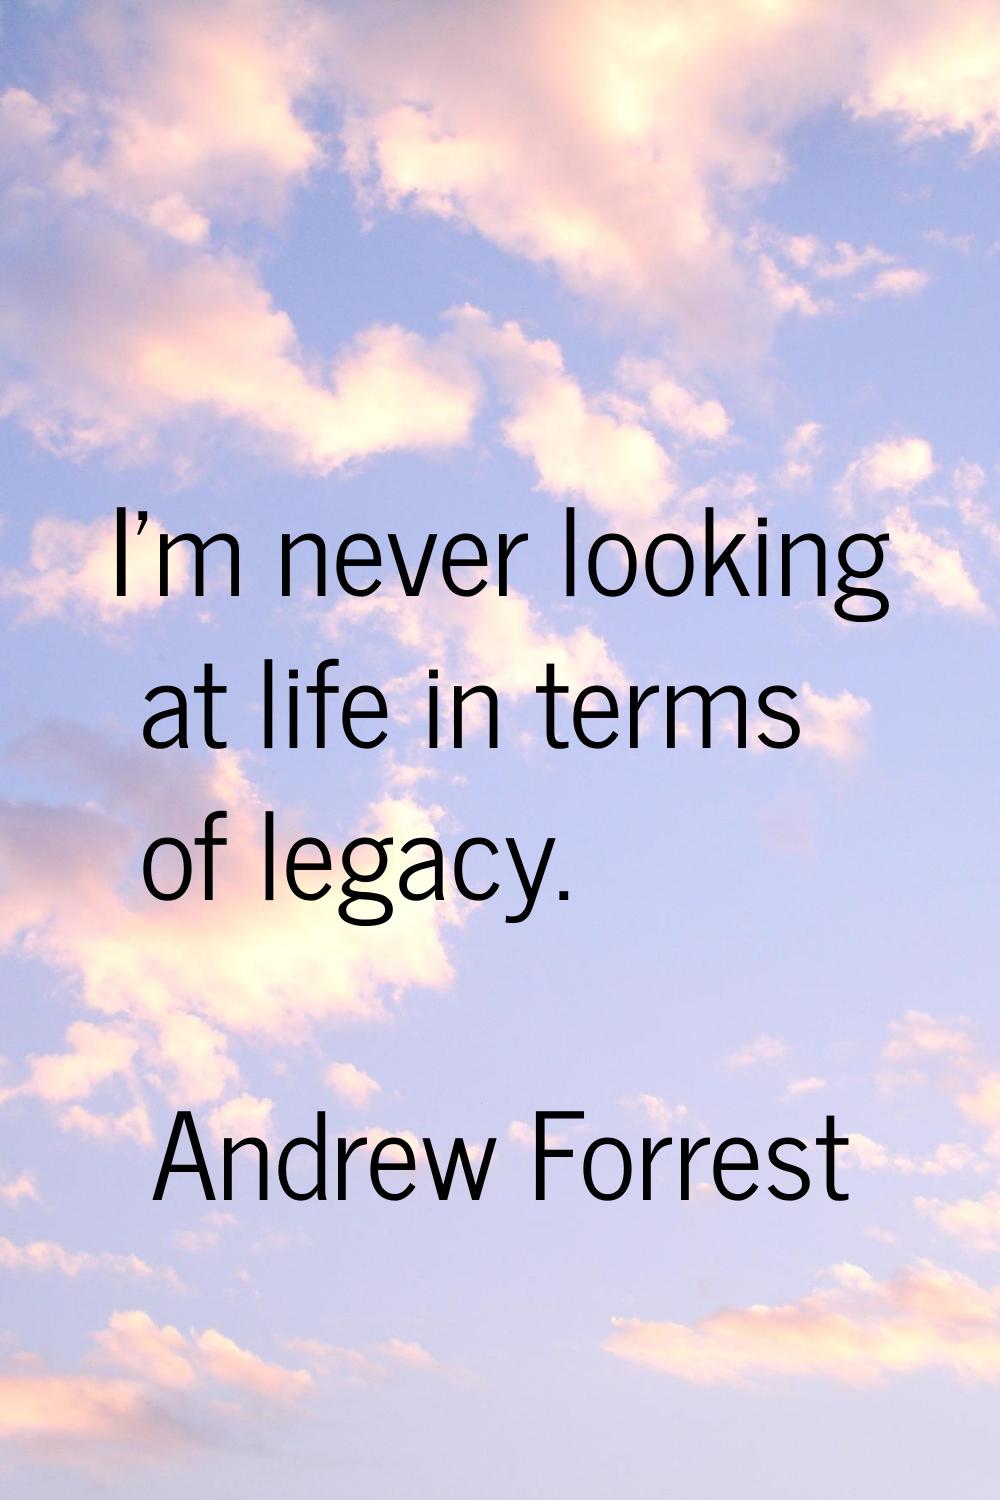 I'm never looking at life in terms of legacy.